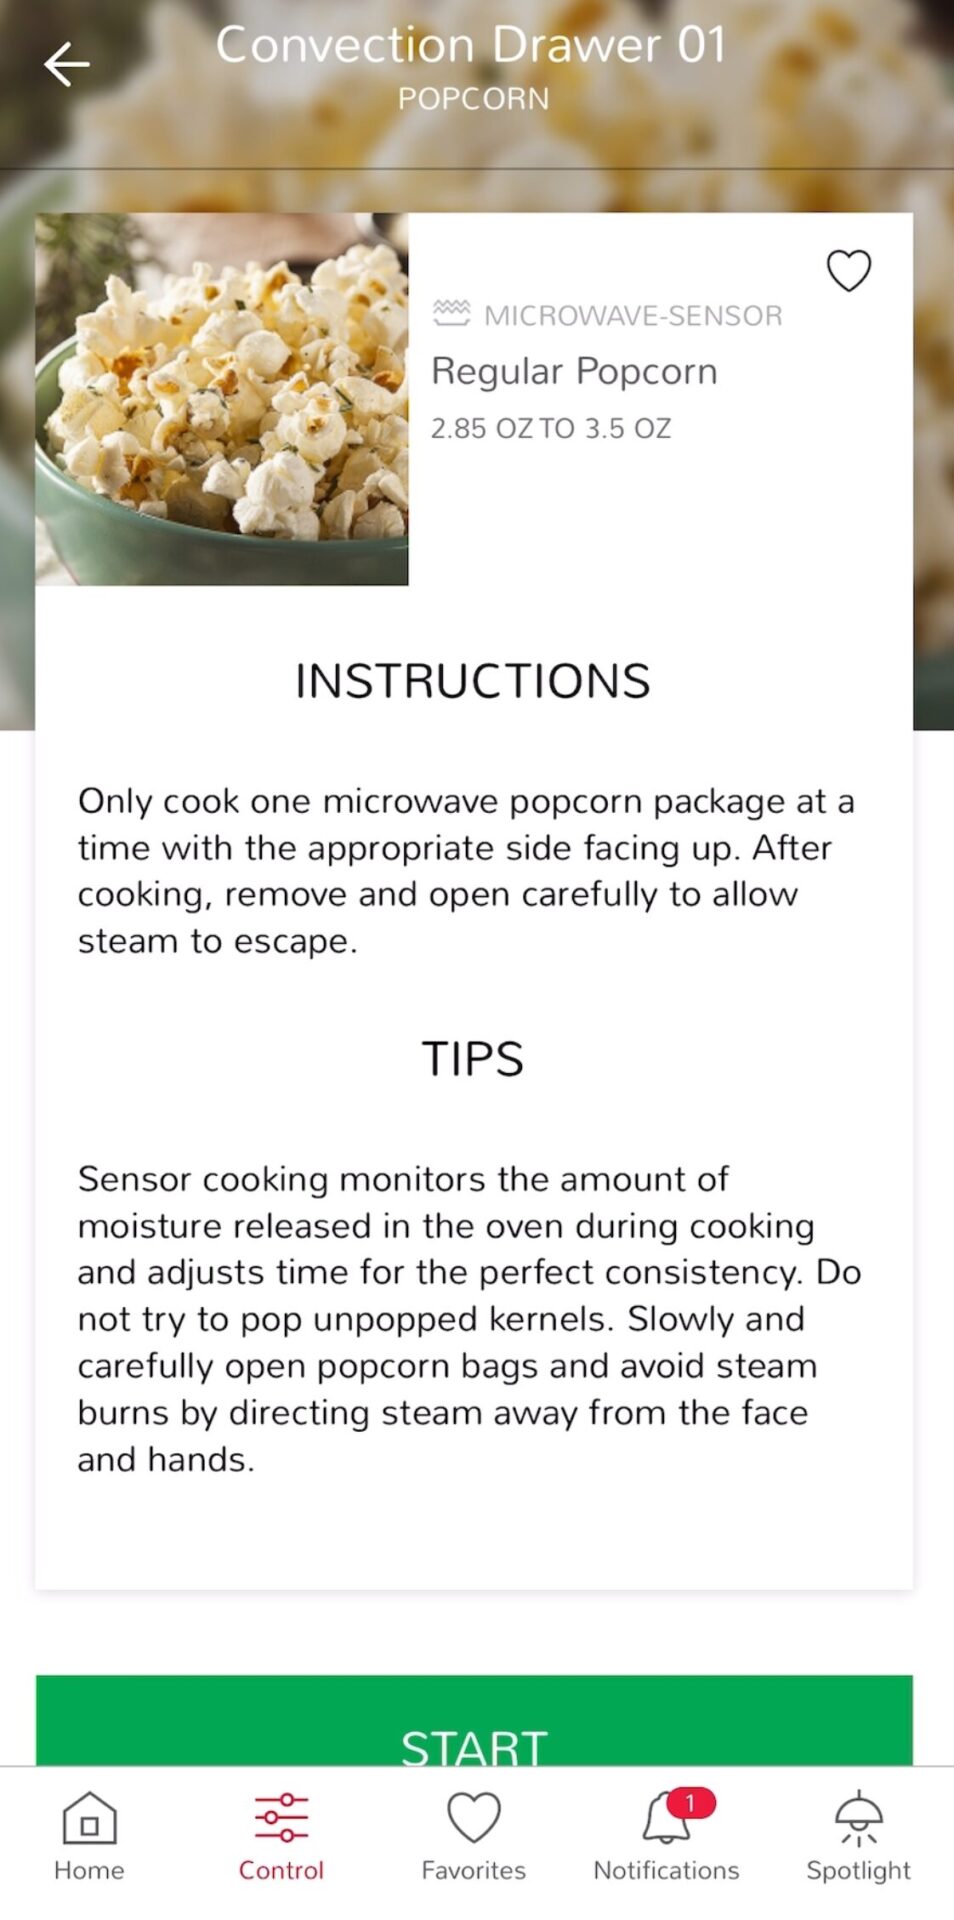 The Sharp Kitchen App screen for cooking popcorn